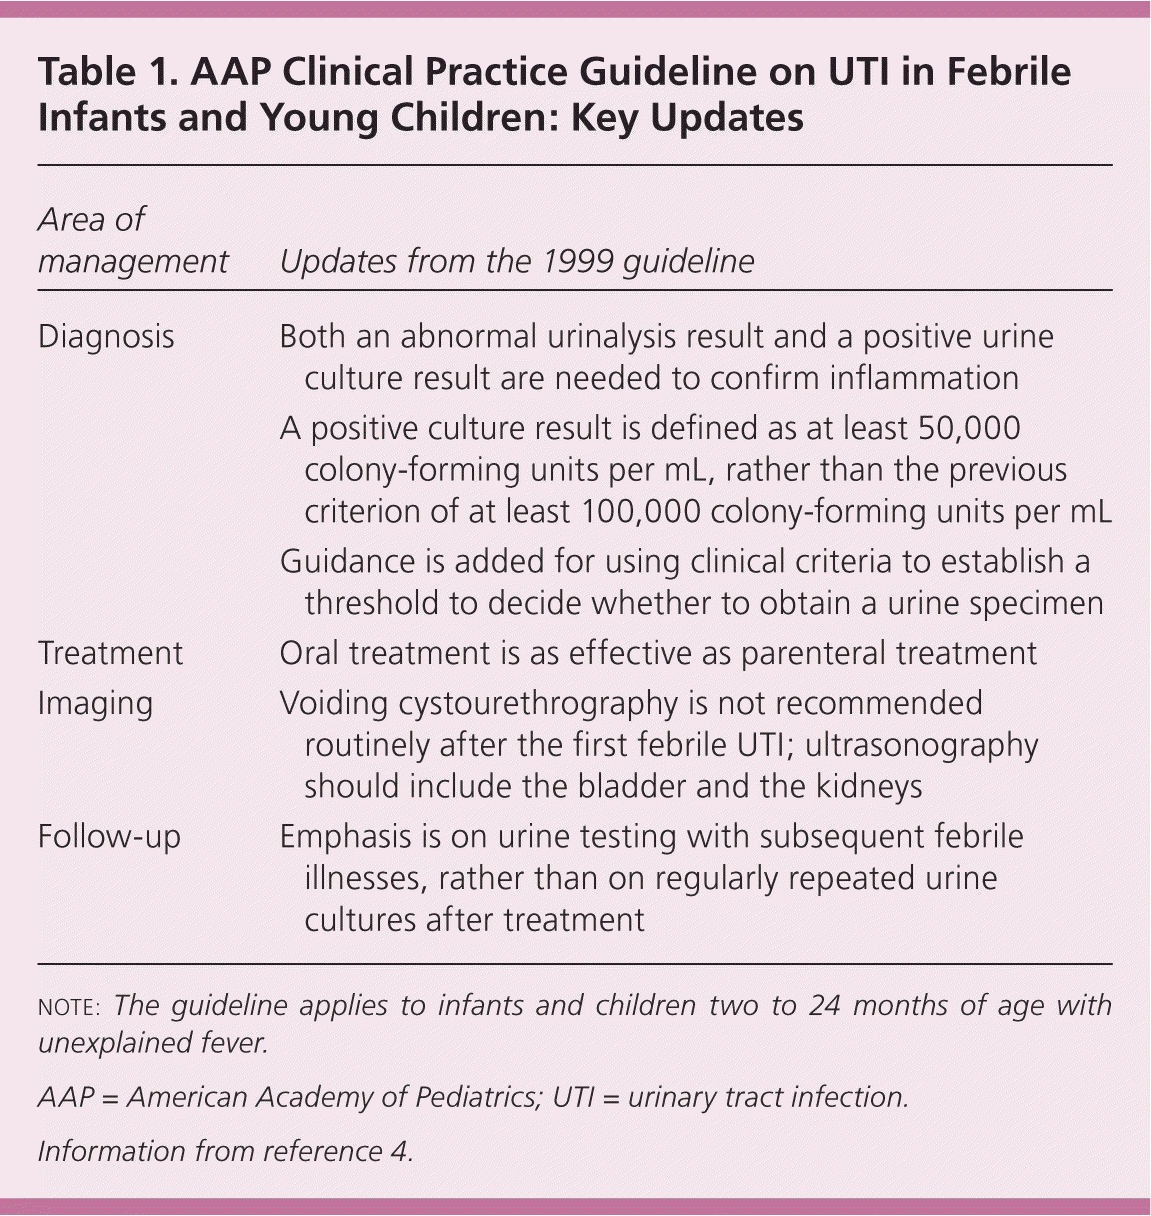 Revised Aap Guideline On Uti In Febrile Infants And Young